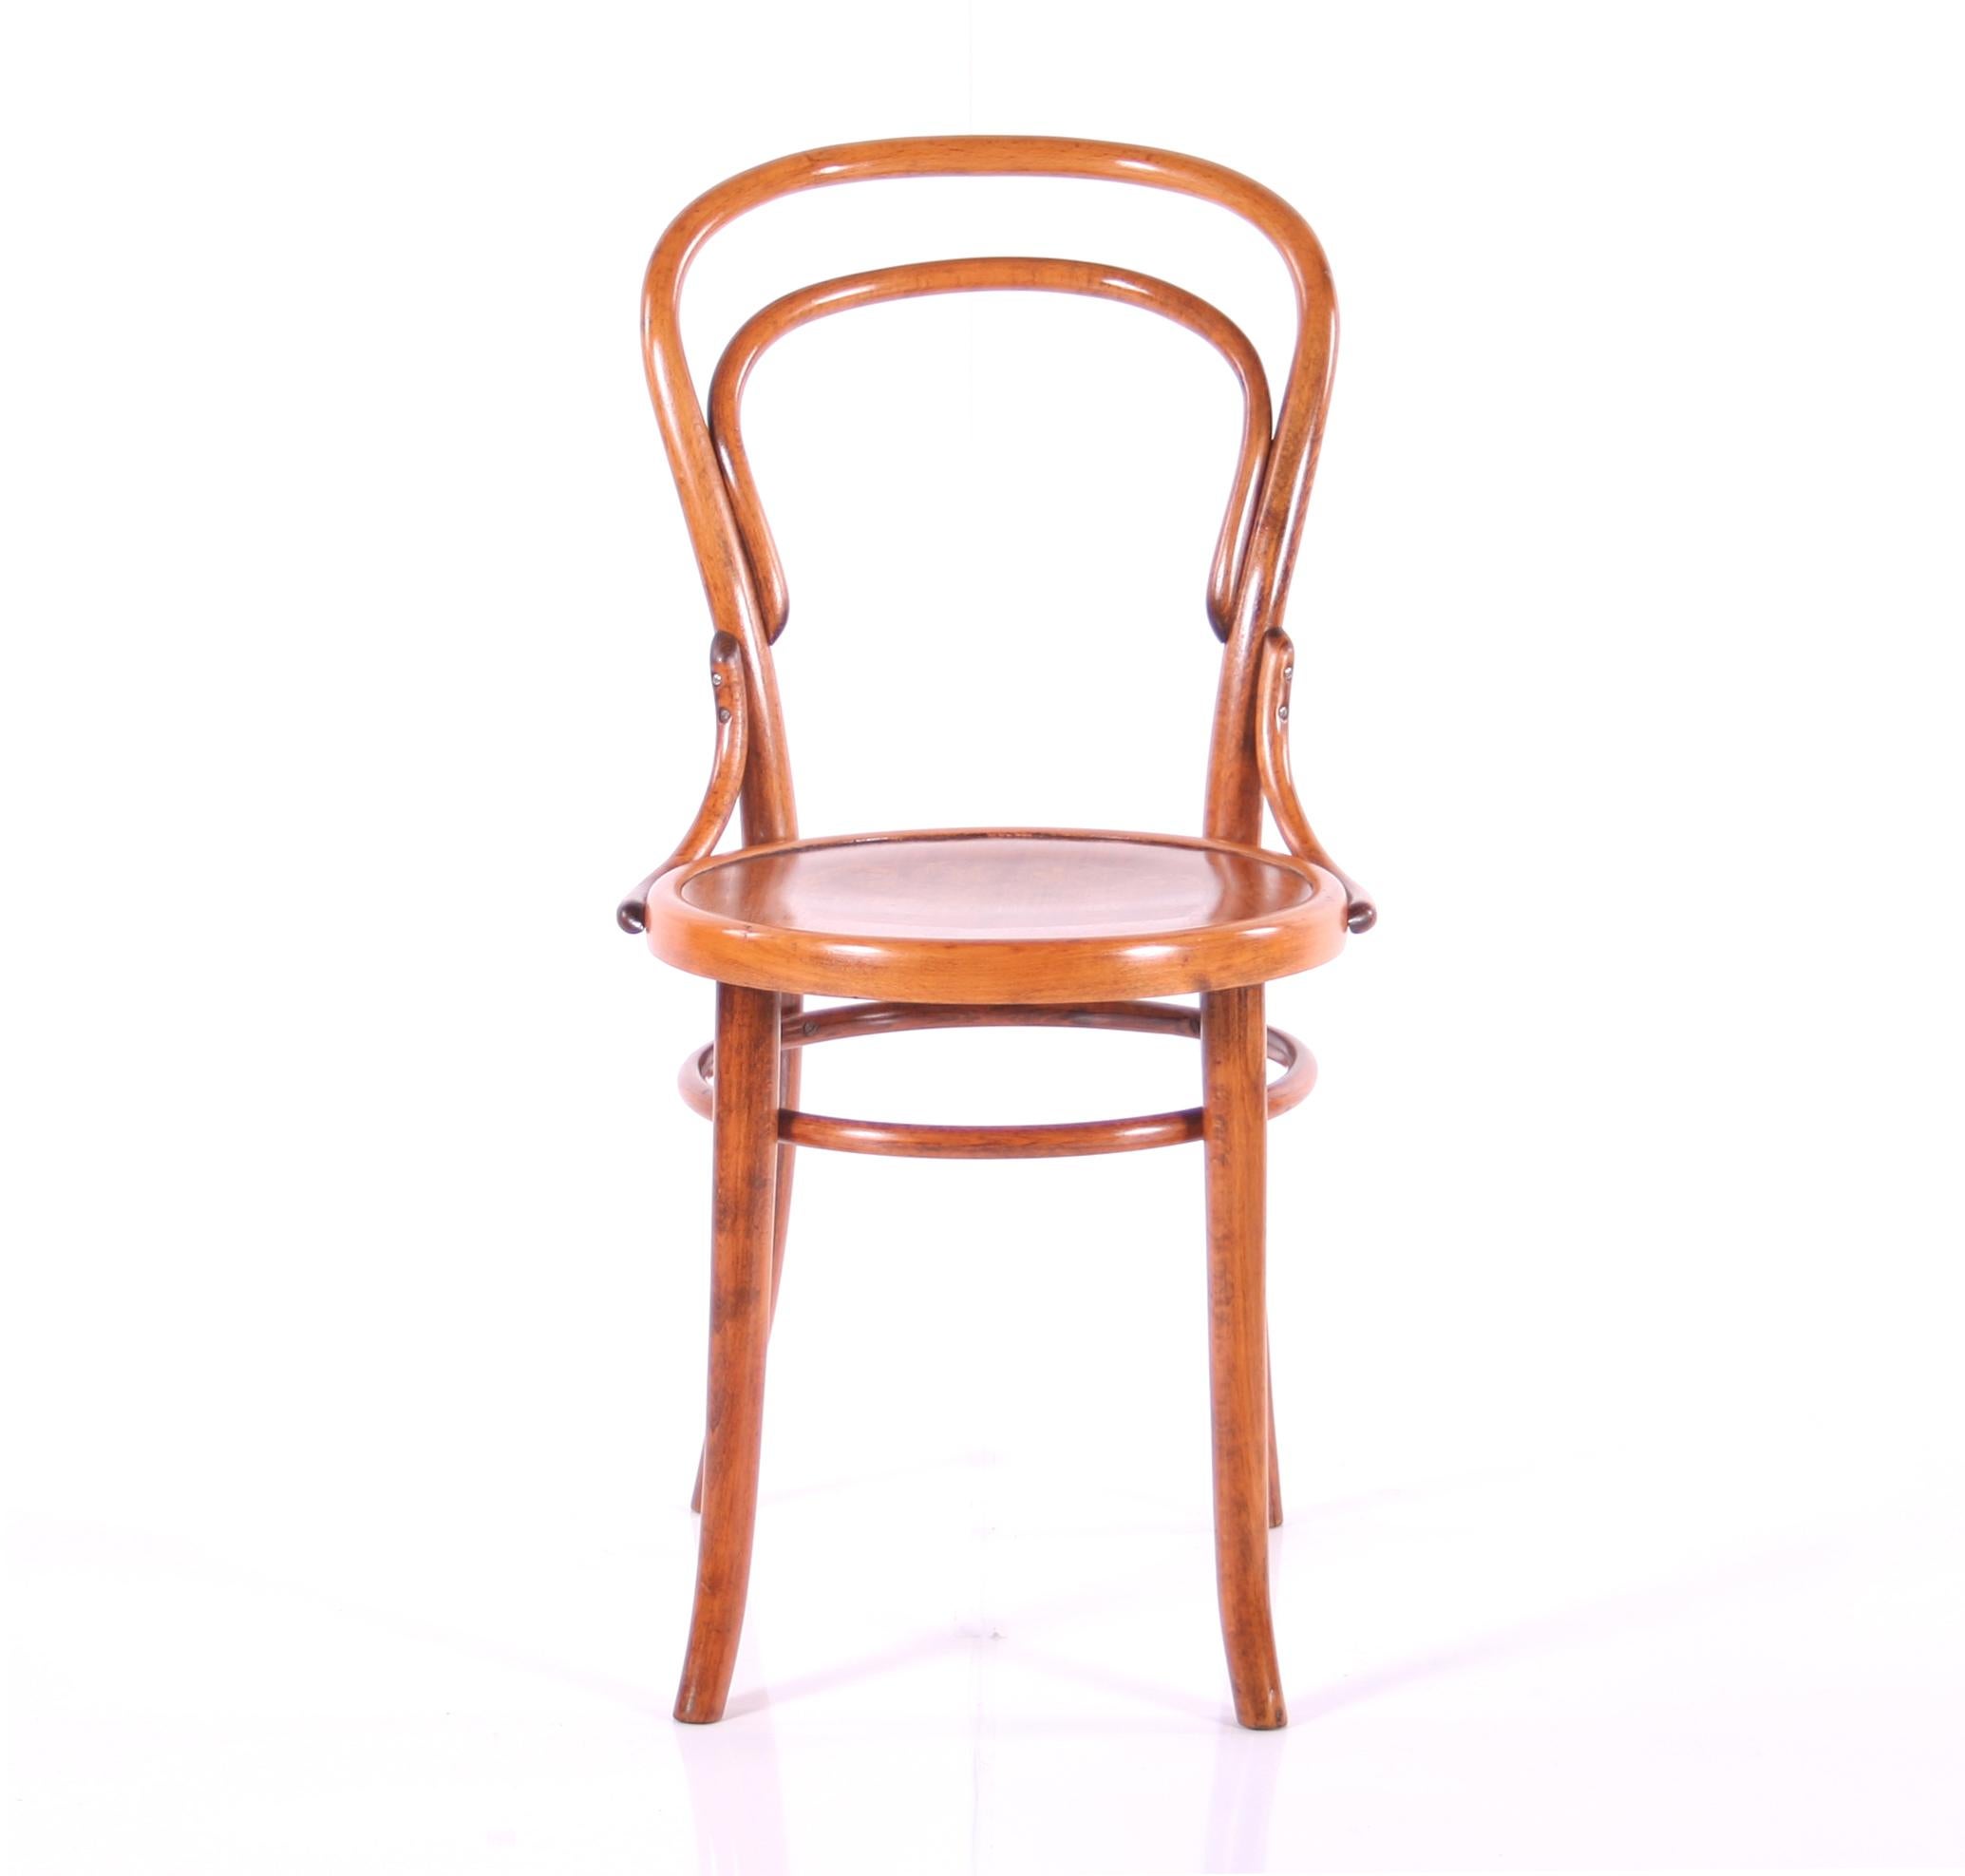 Classical Thonet No. 14, ie bent furniture. The chair is very visual. You will place it in the right time, and the story of your grandfather sitting on it will not wait long. Your father inherited her because his father was writing her thesis on